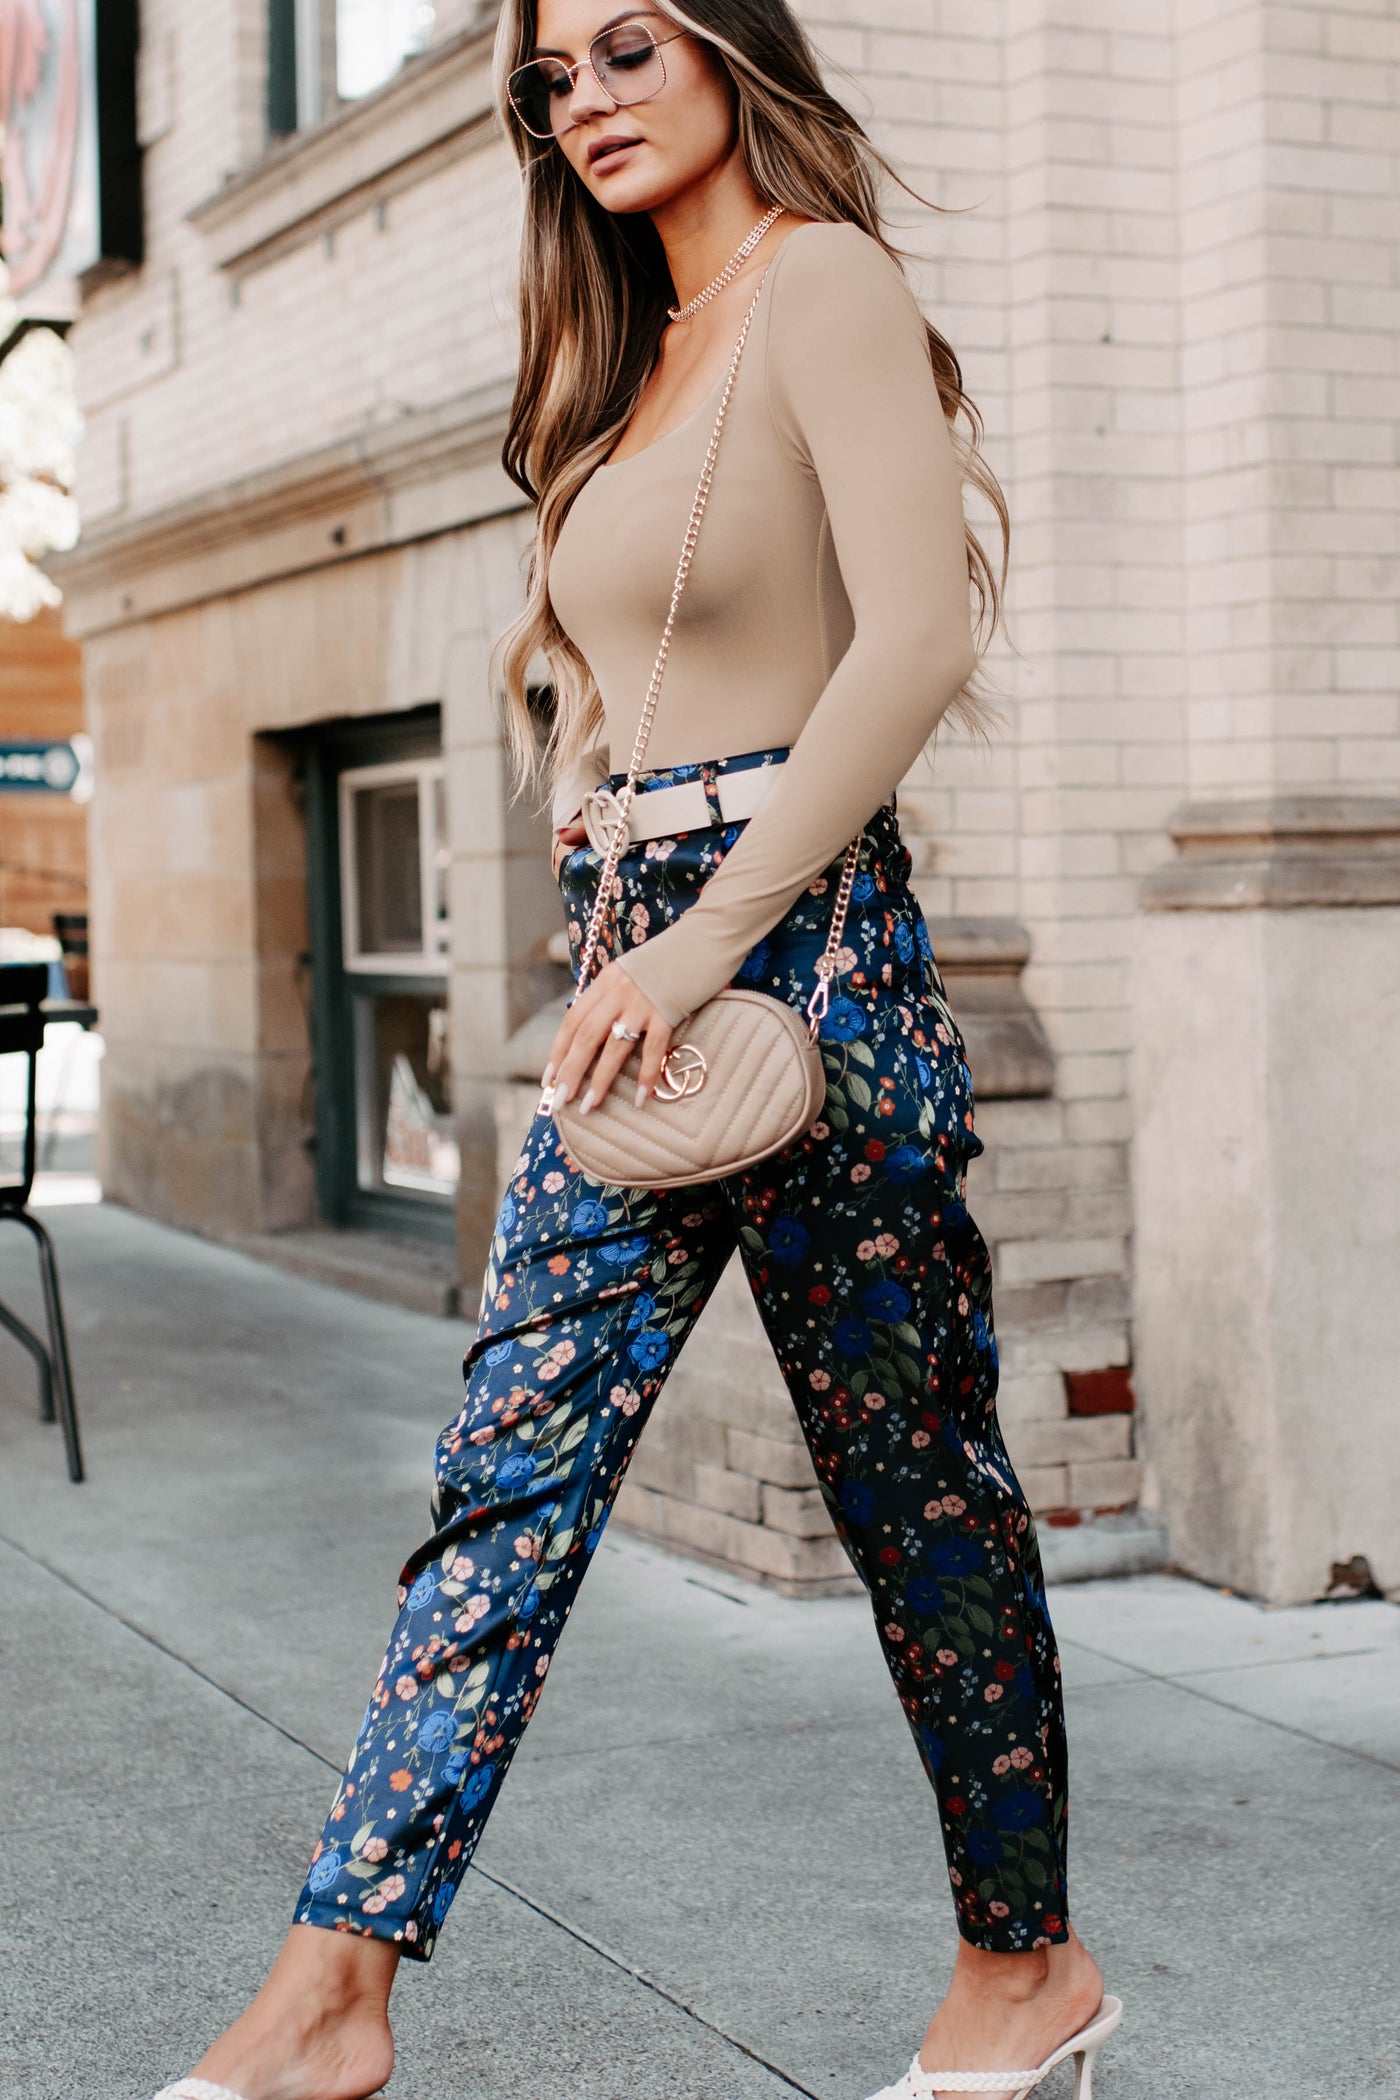 ZARA NEW WOMAN HIGH-WAISTED FLORAL PRINTED PANTS ECRU BLUE ALL SIZES  2826/231